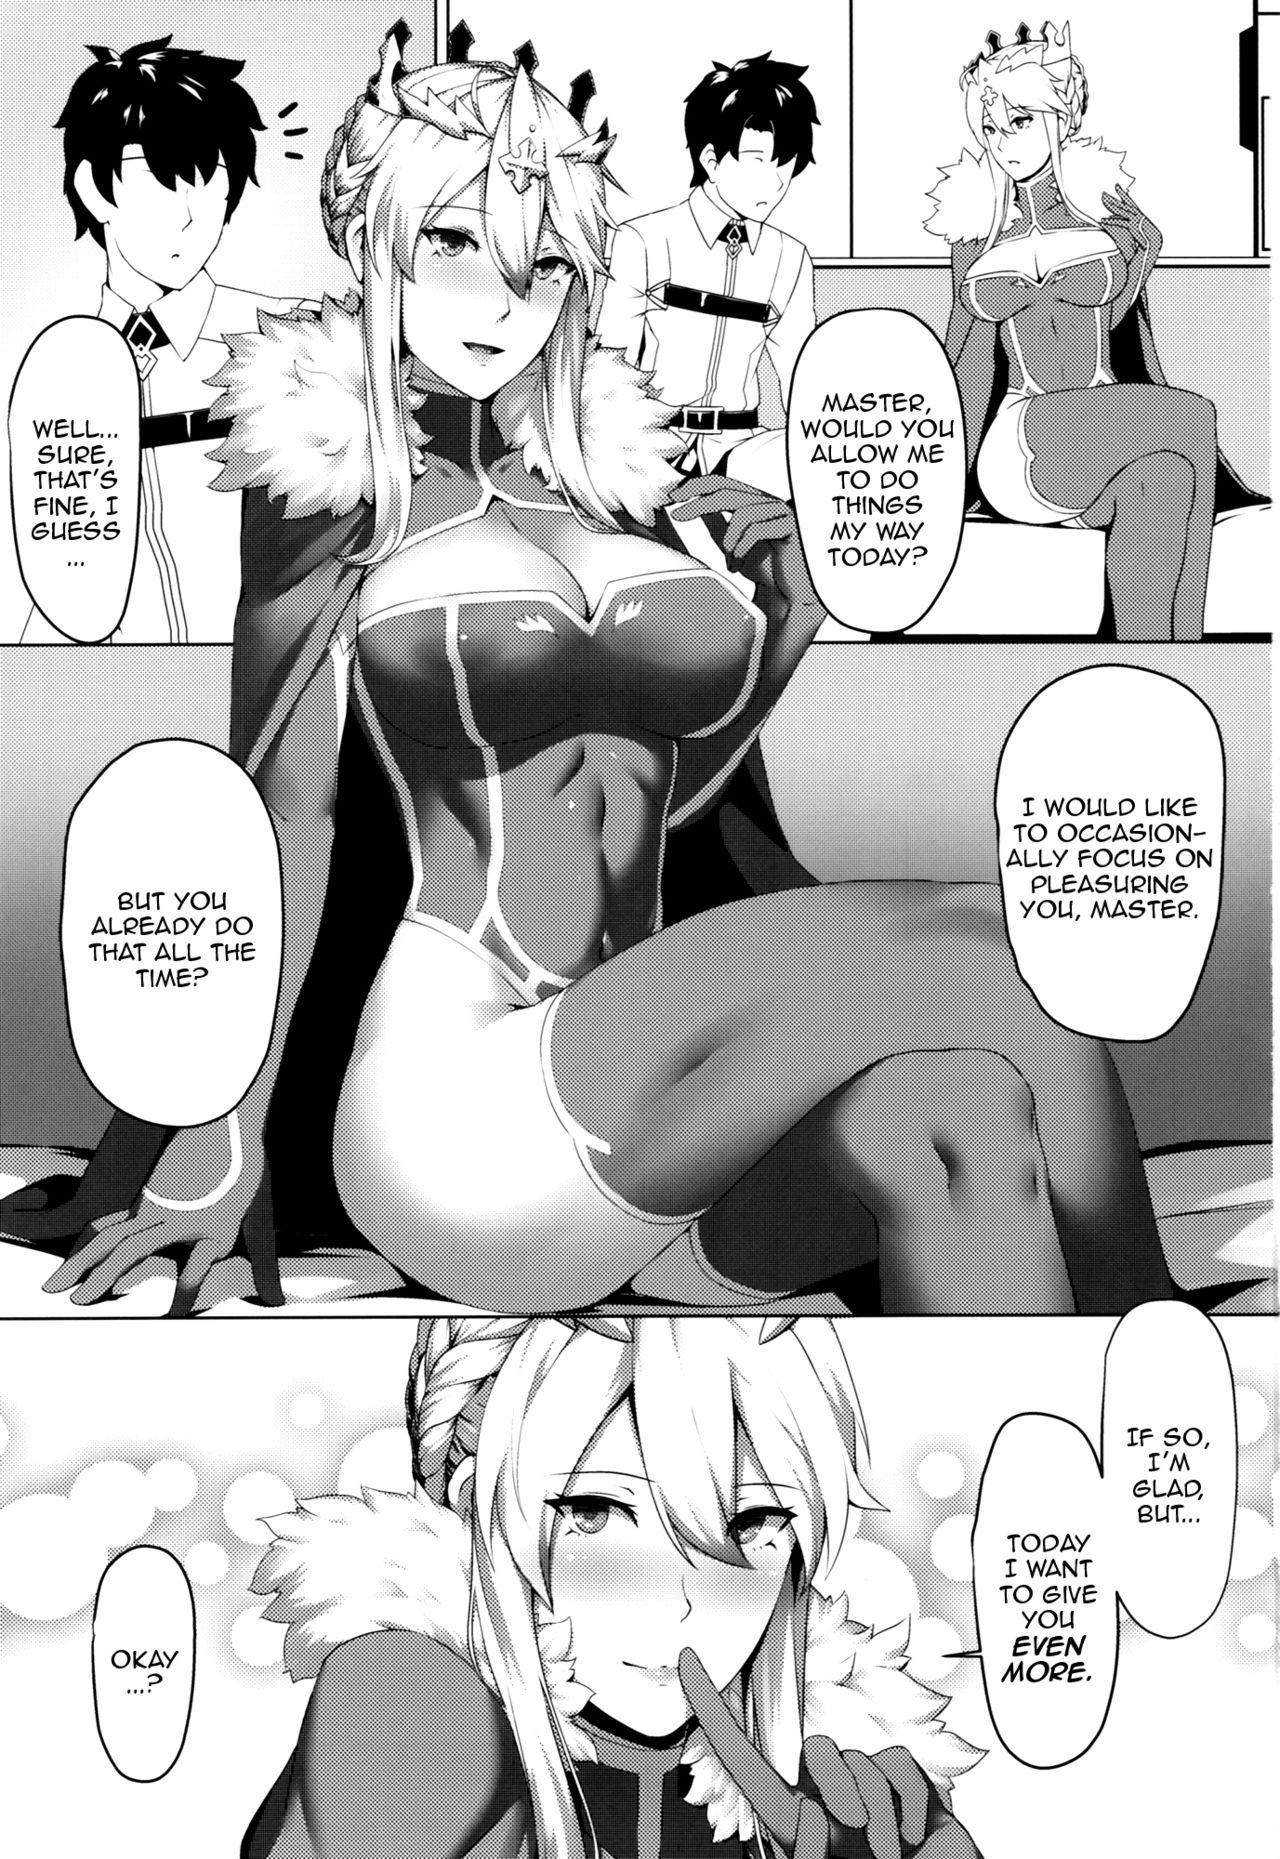 Blowing How do you like that? - Fate grand order Gay Natural - Page 2